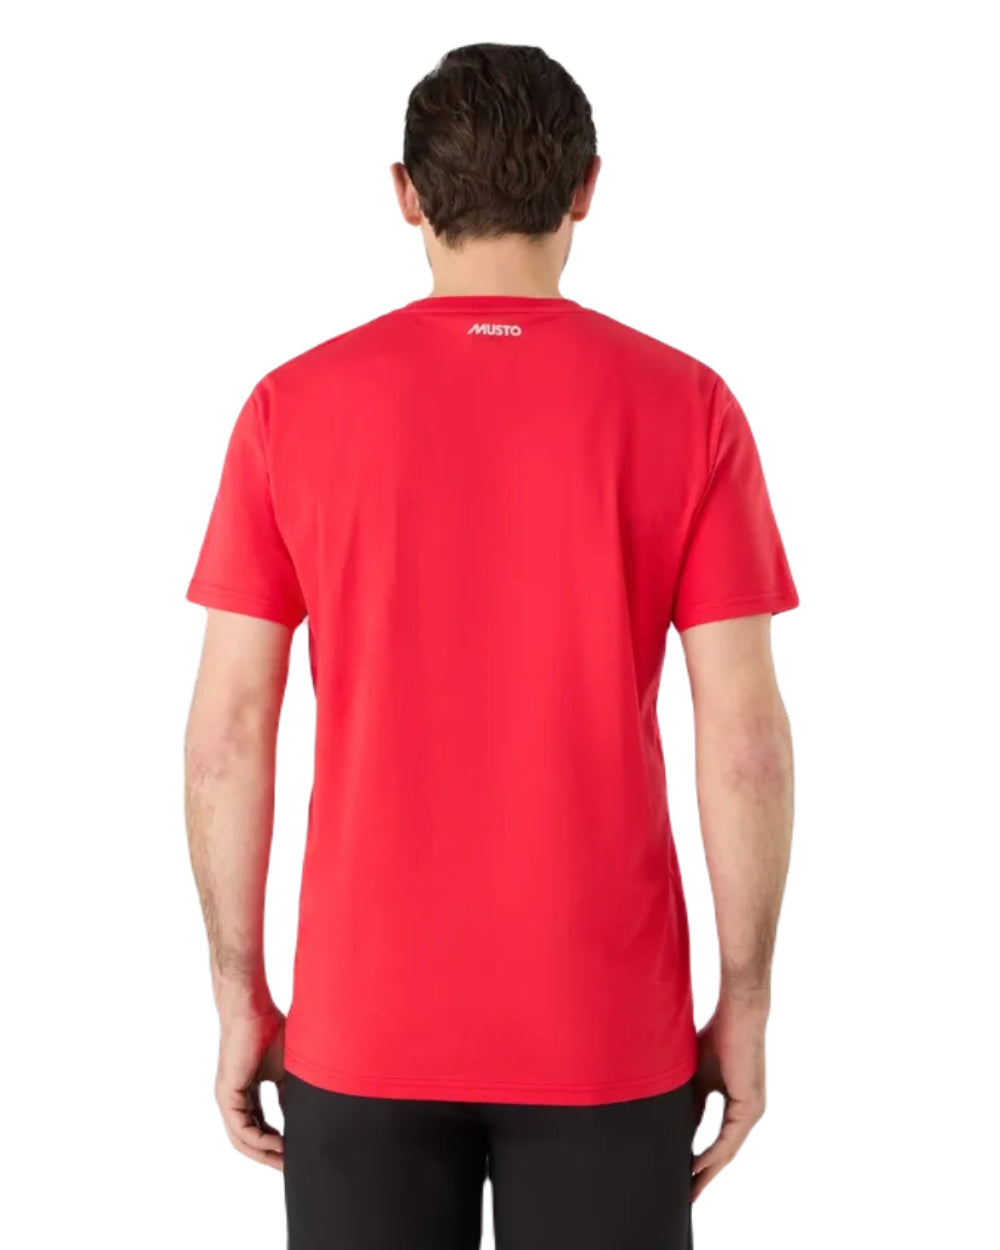 True Red Coloured Musto Logo Tee On A White Background 